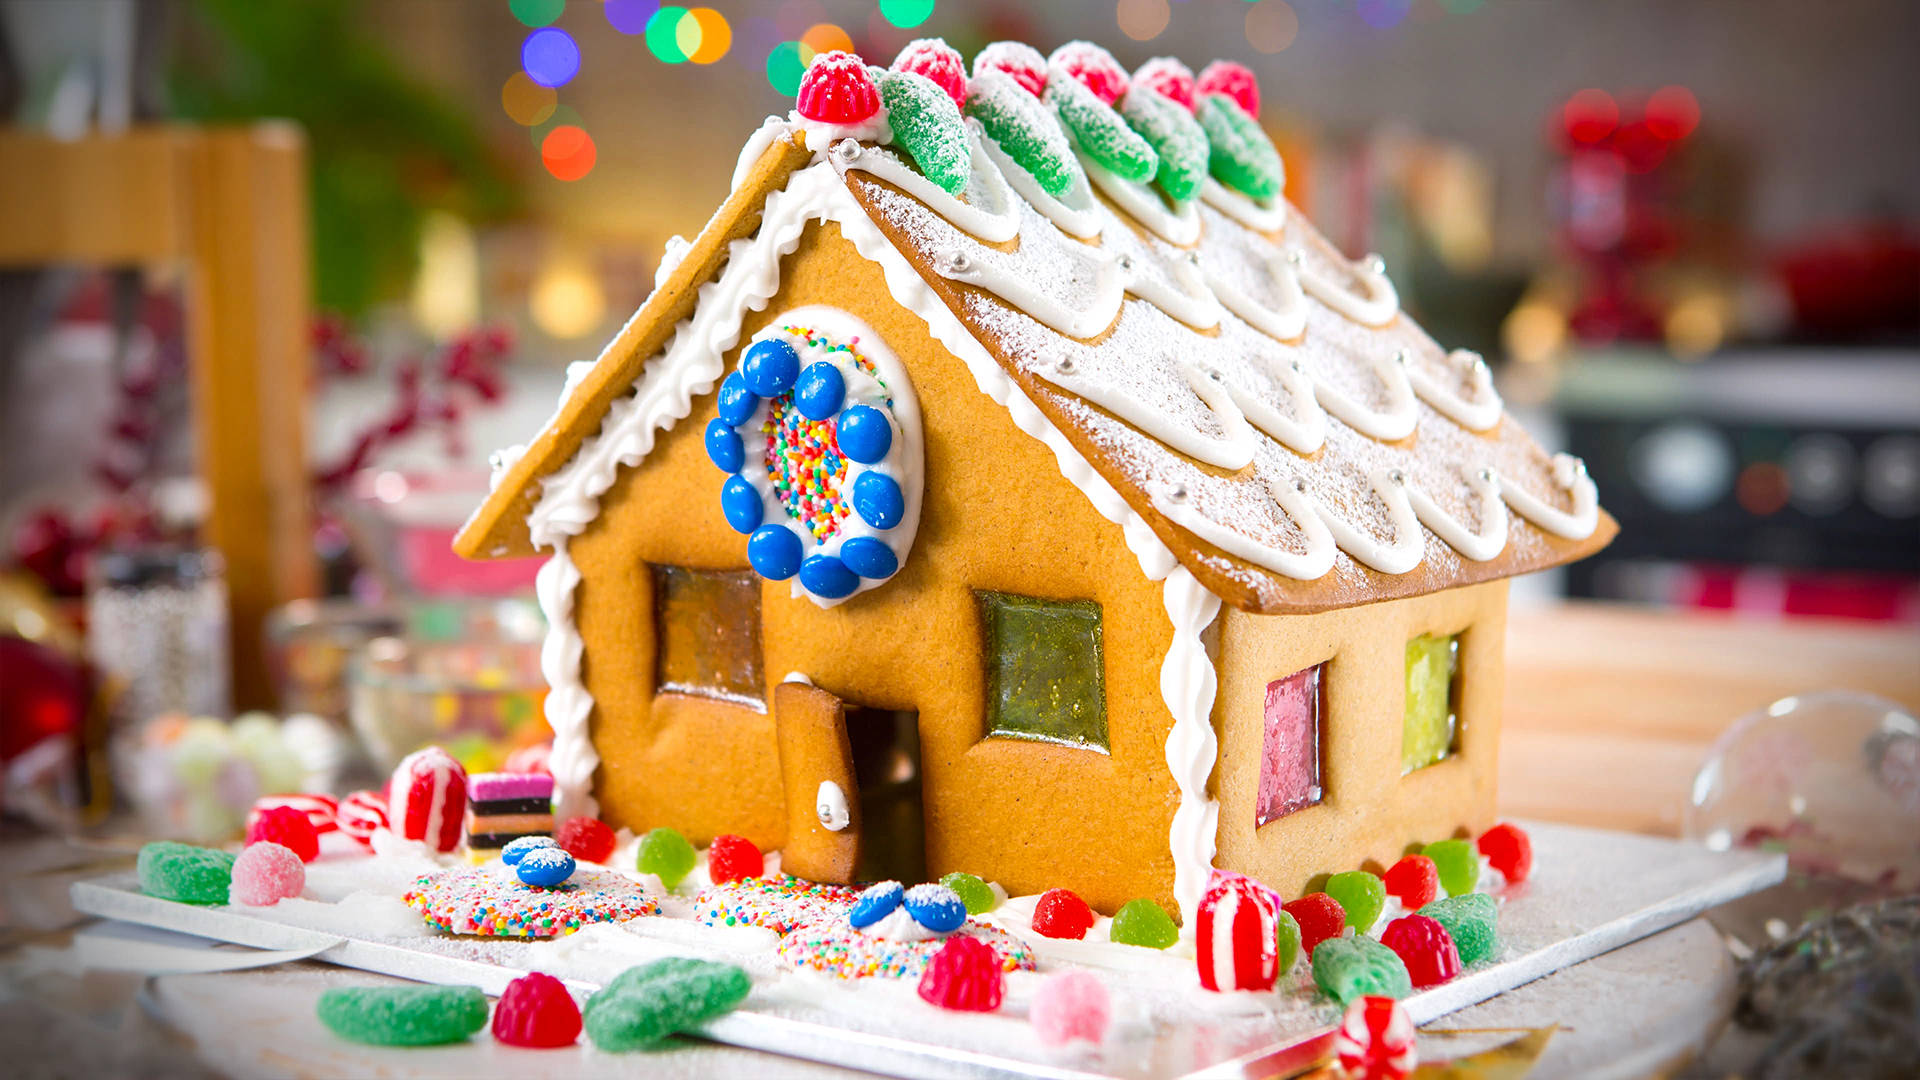 Top 999+ Gingerbread House Wallpapers Full HD, 4K Free to Use